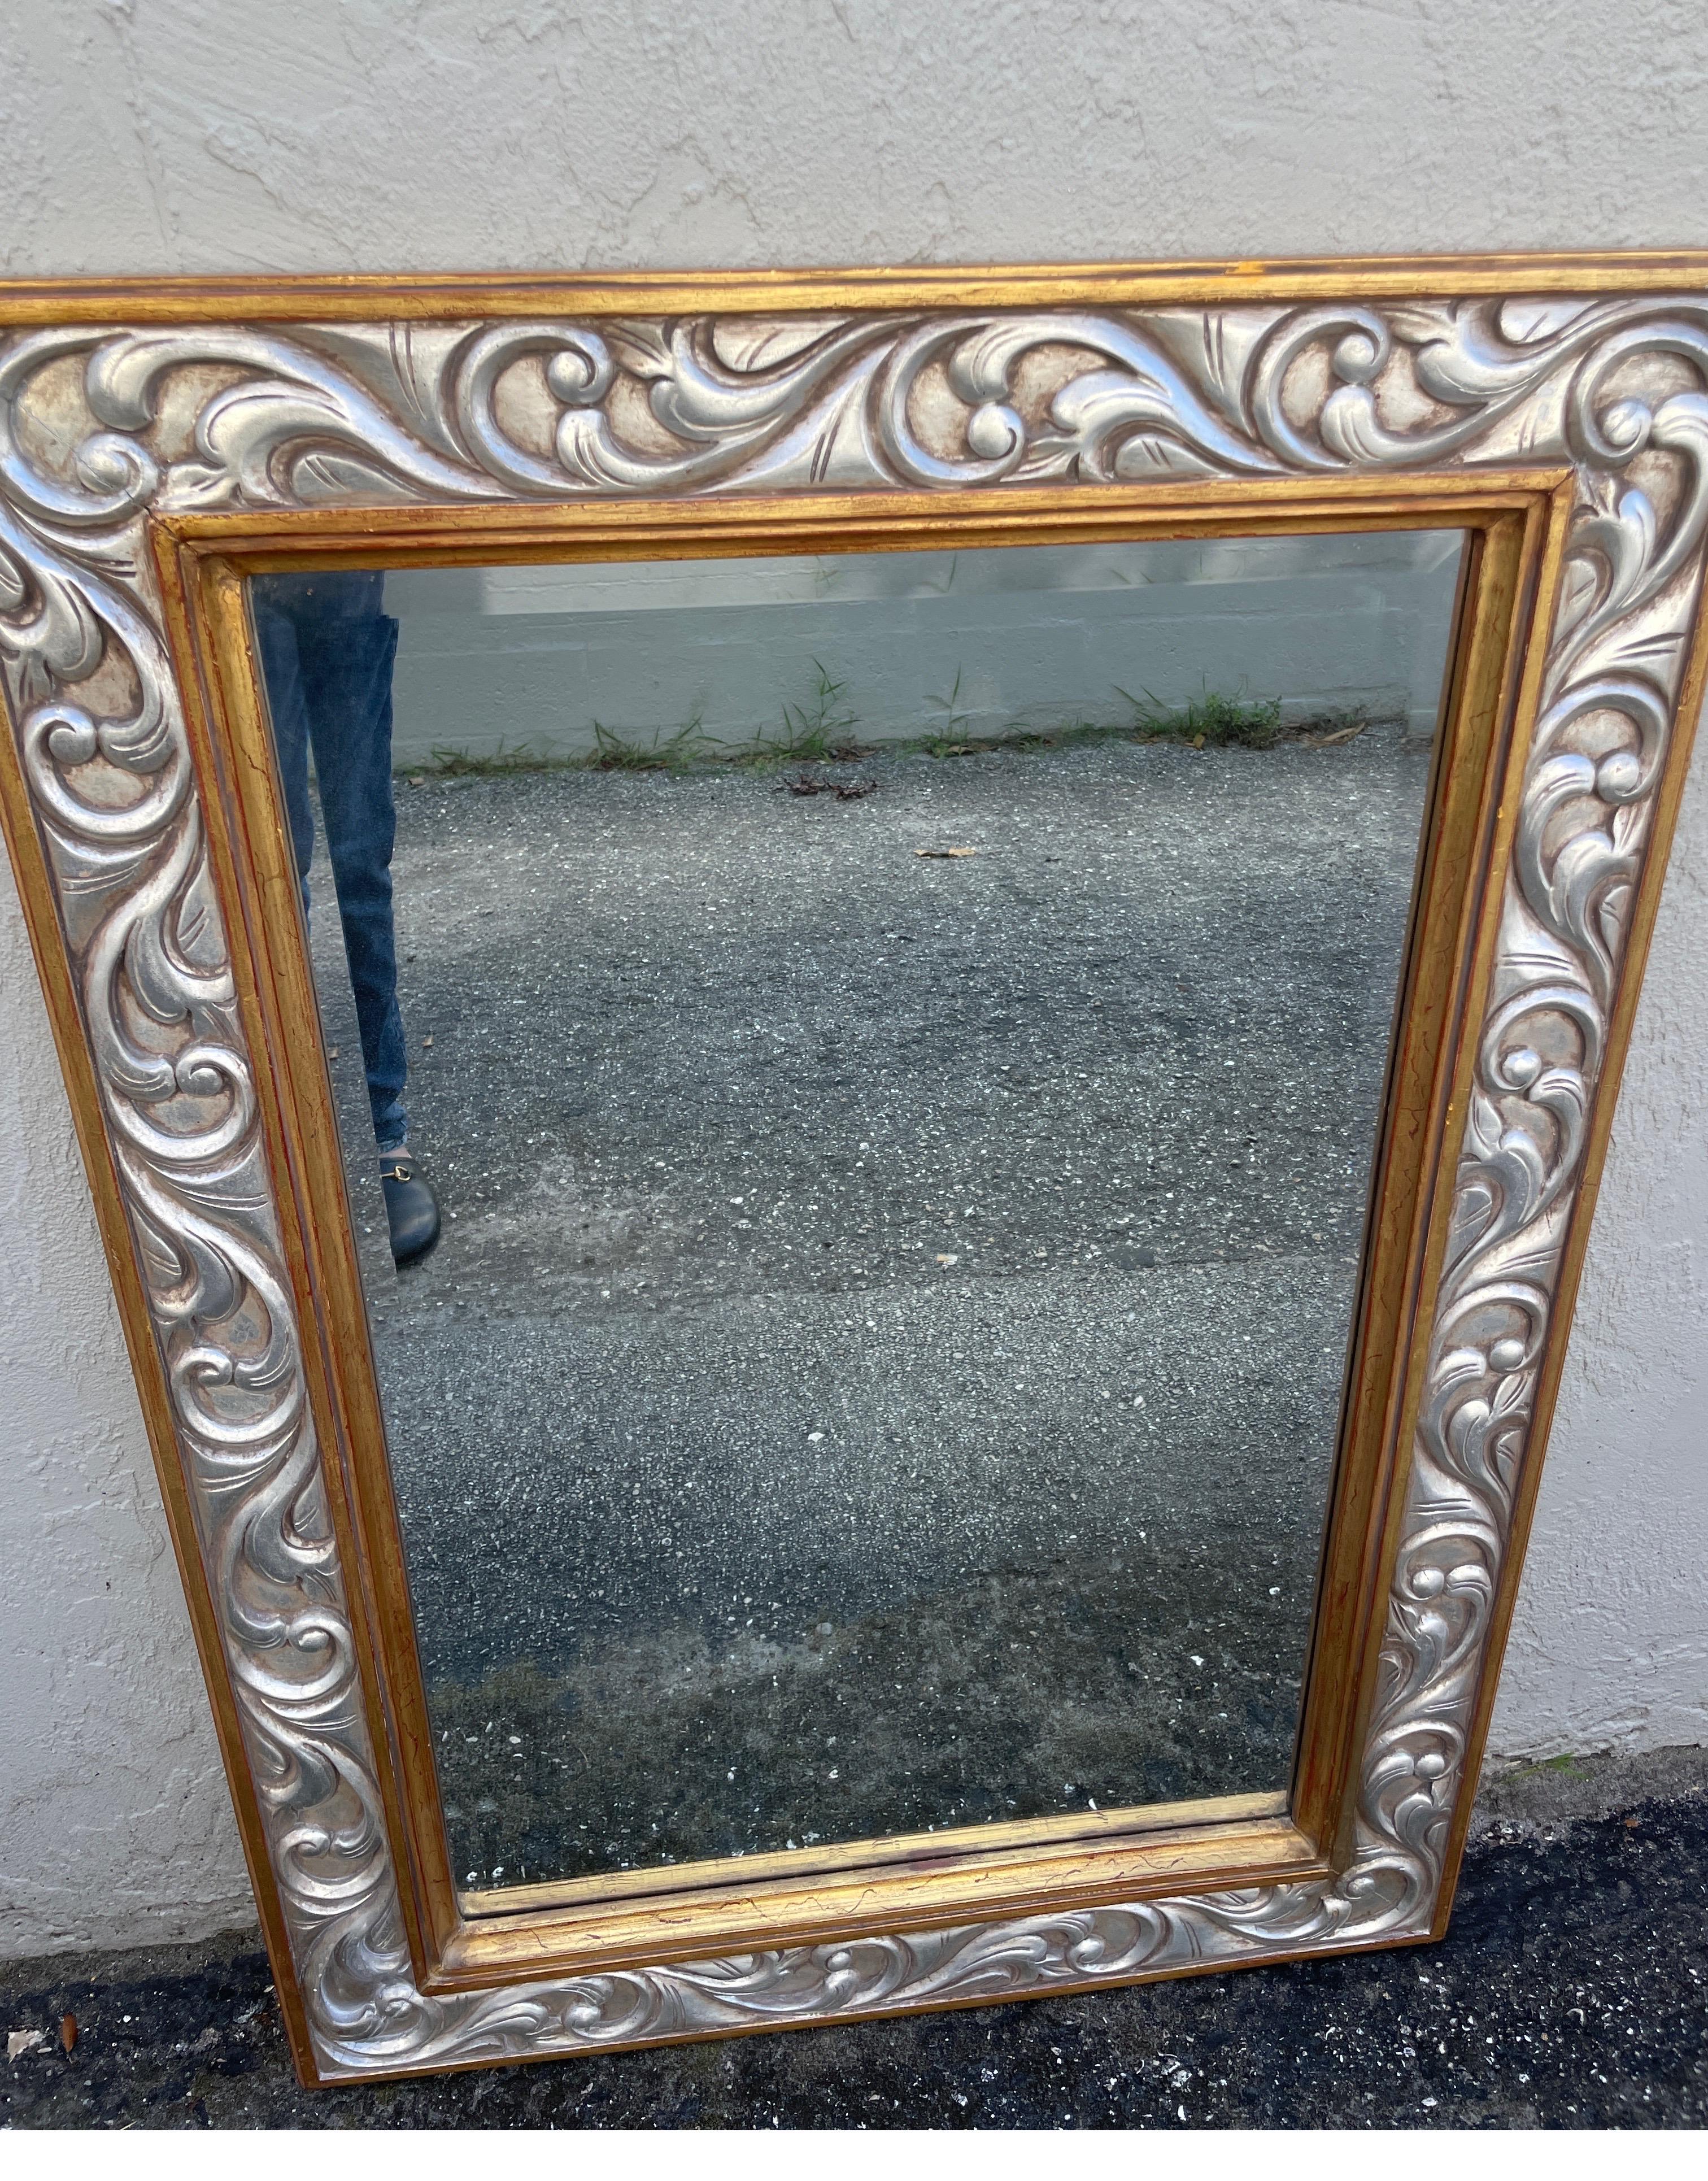 Very fine hand carved and gilded wall mirror by Harrison & Gil.  Predominantly silver gilt with gold accents.